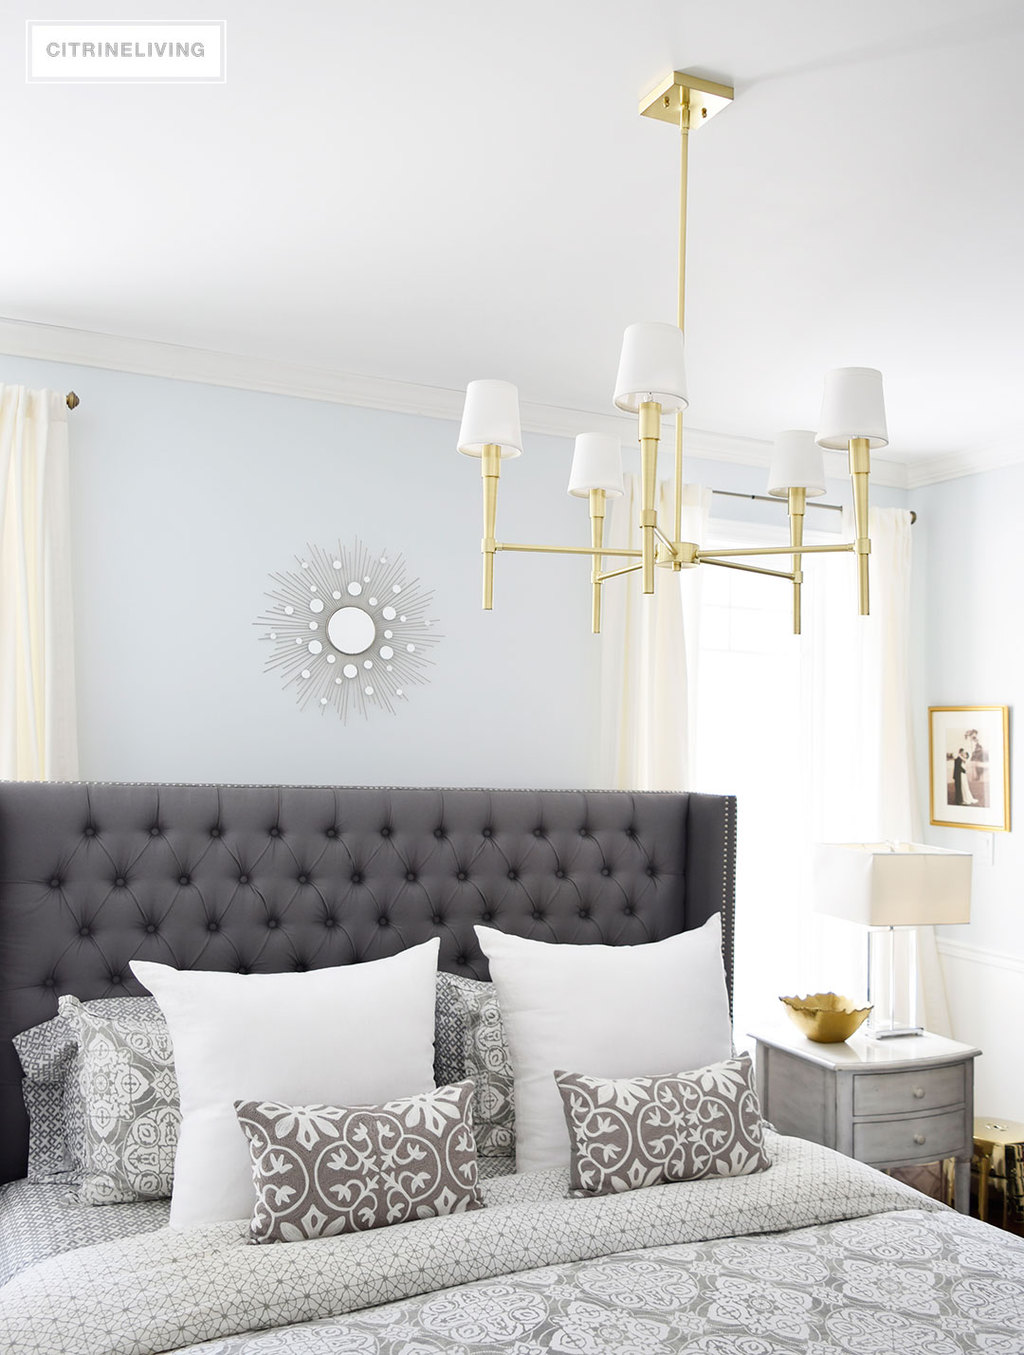 A brass chandelier and accents add modern sophistication to this elegant bedroom.